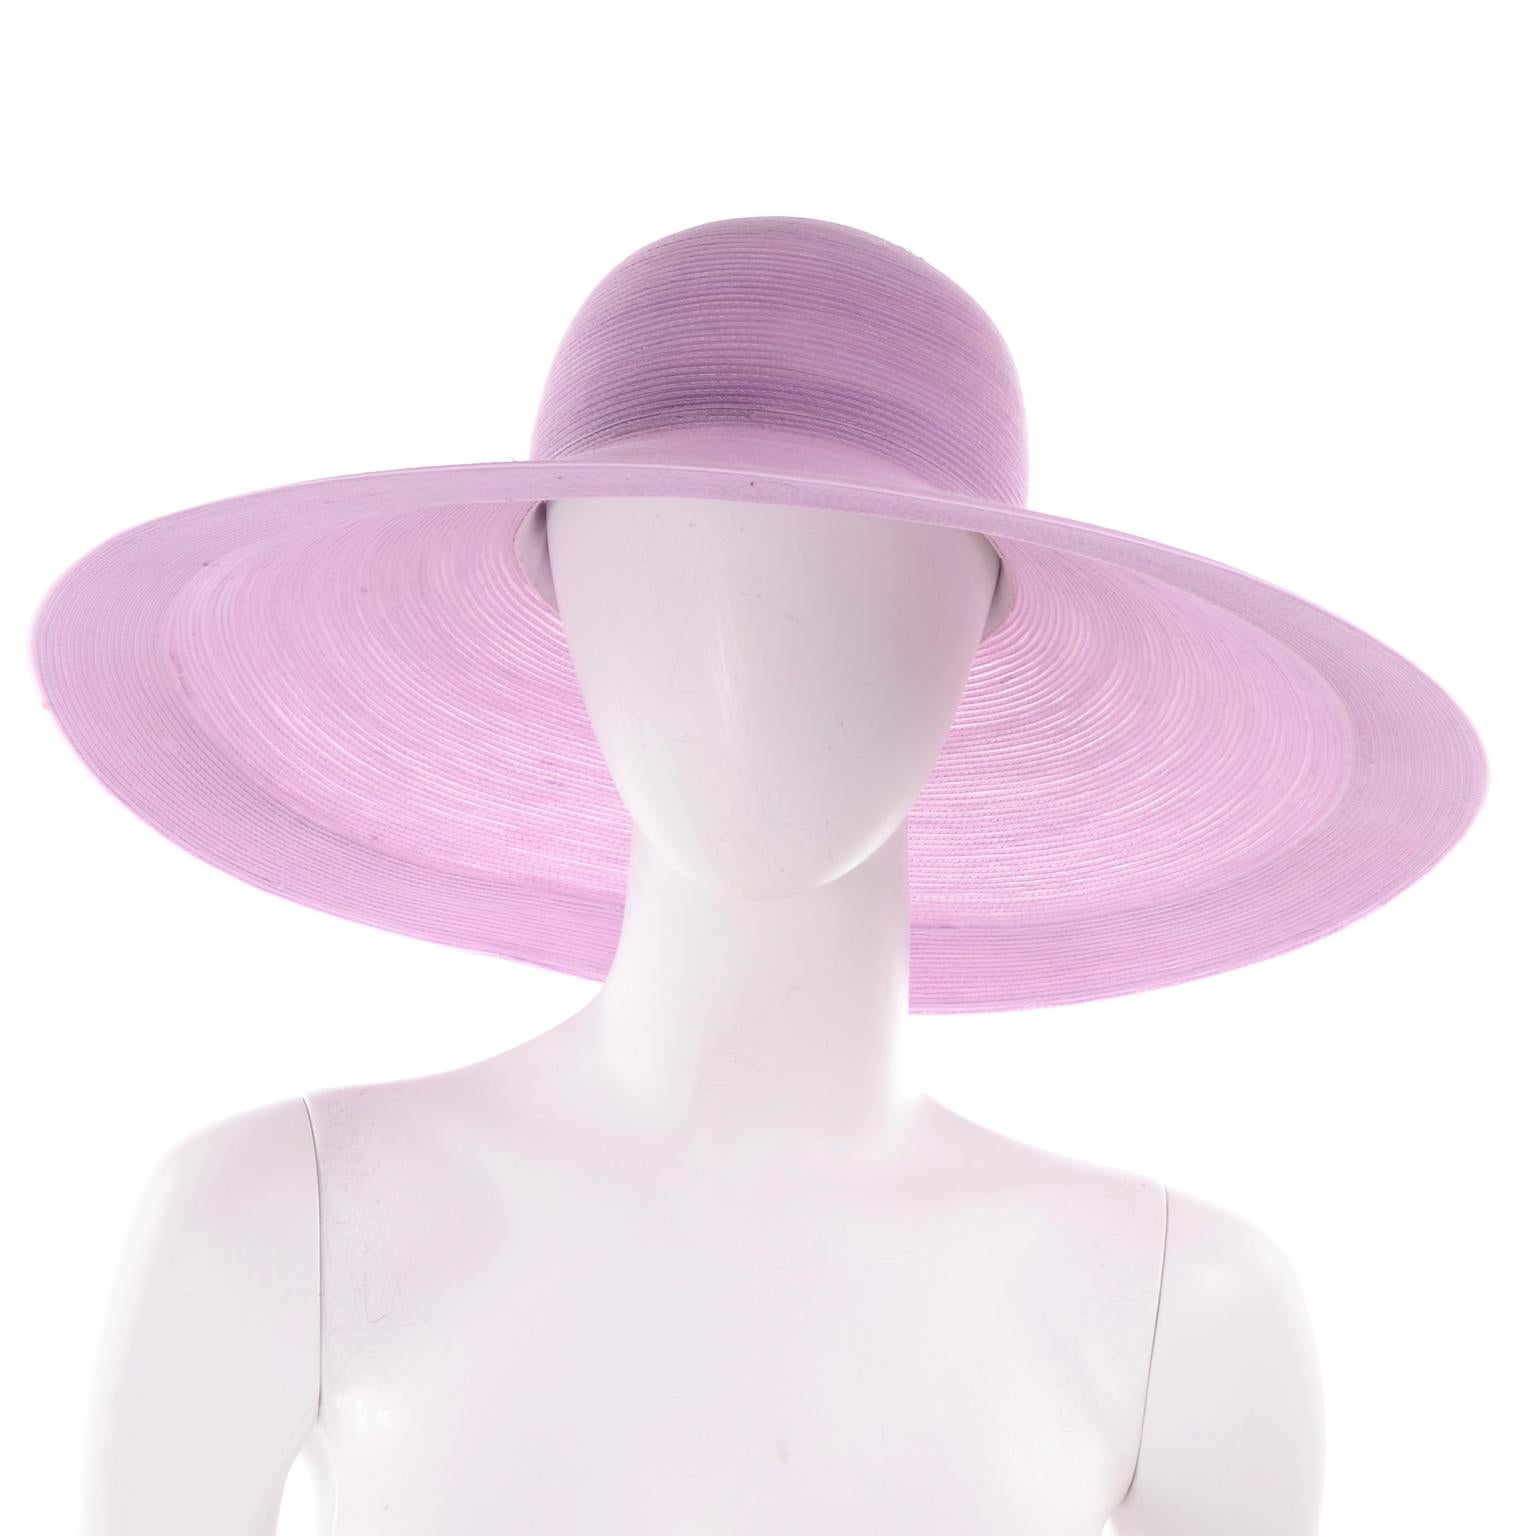 We love vintage Patricia Underwood hats! This one is a woven lavender sun hat with a wide brim, bearing the Patricia Underwood New York black label. This hat has a nice wide brim and you could tie a scarf or ribbon around it if you'd like to change